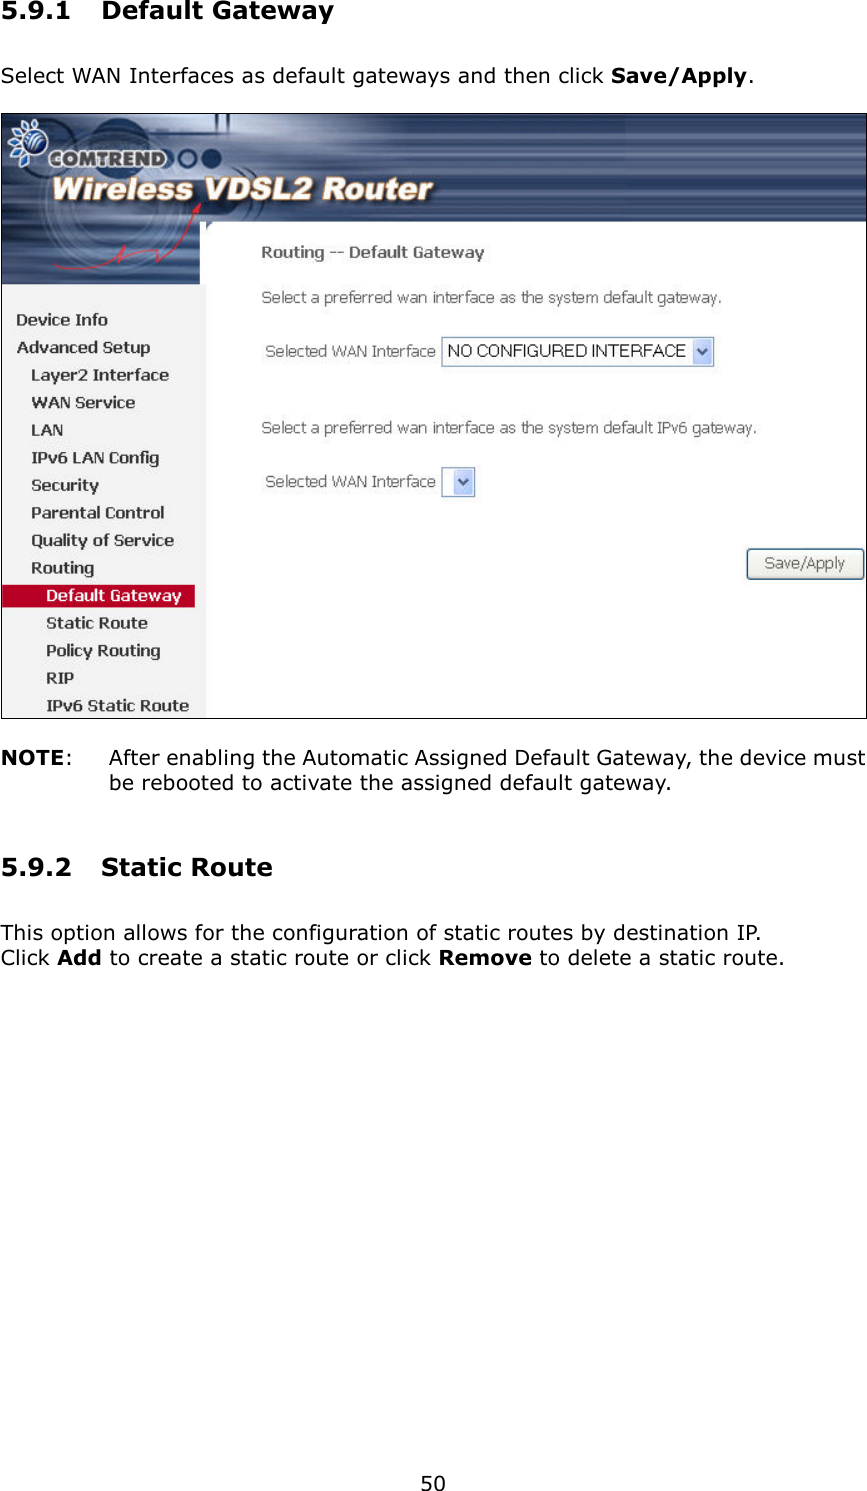   50 5.9.1  Default Gateway Select WAN Interfaces as default gateways and then click Save/Apply.    NOTE:    After enabling the Automatic Assigned Default Gateway, the device must be rebooted to activate the assigned default gateway. 5.9.2  Static Route This option allows for the configuration of static routes by destination IP.   Click Add to create a static route or click Remove to delete a static route.  